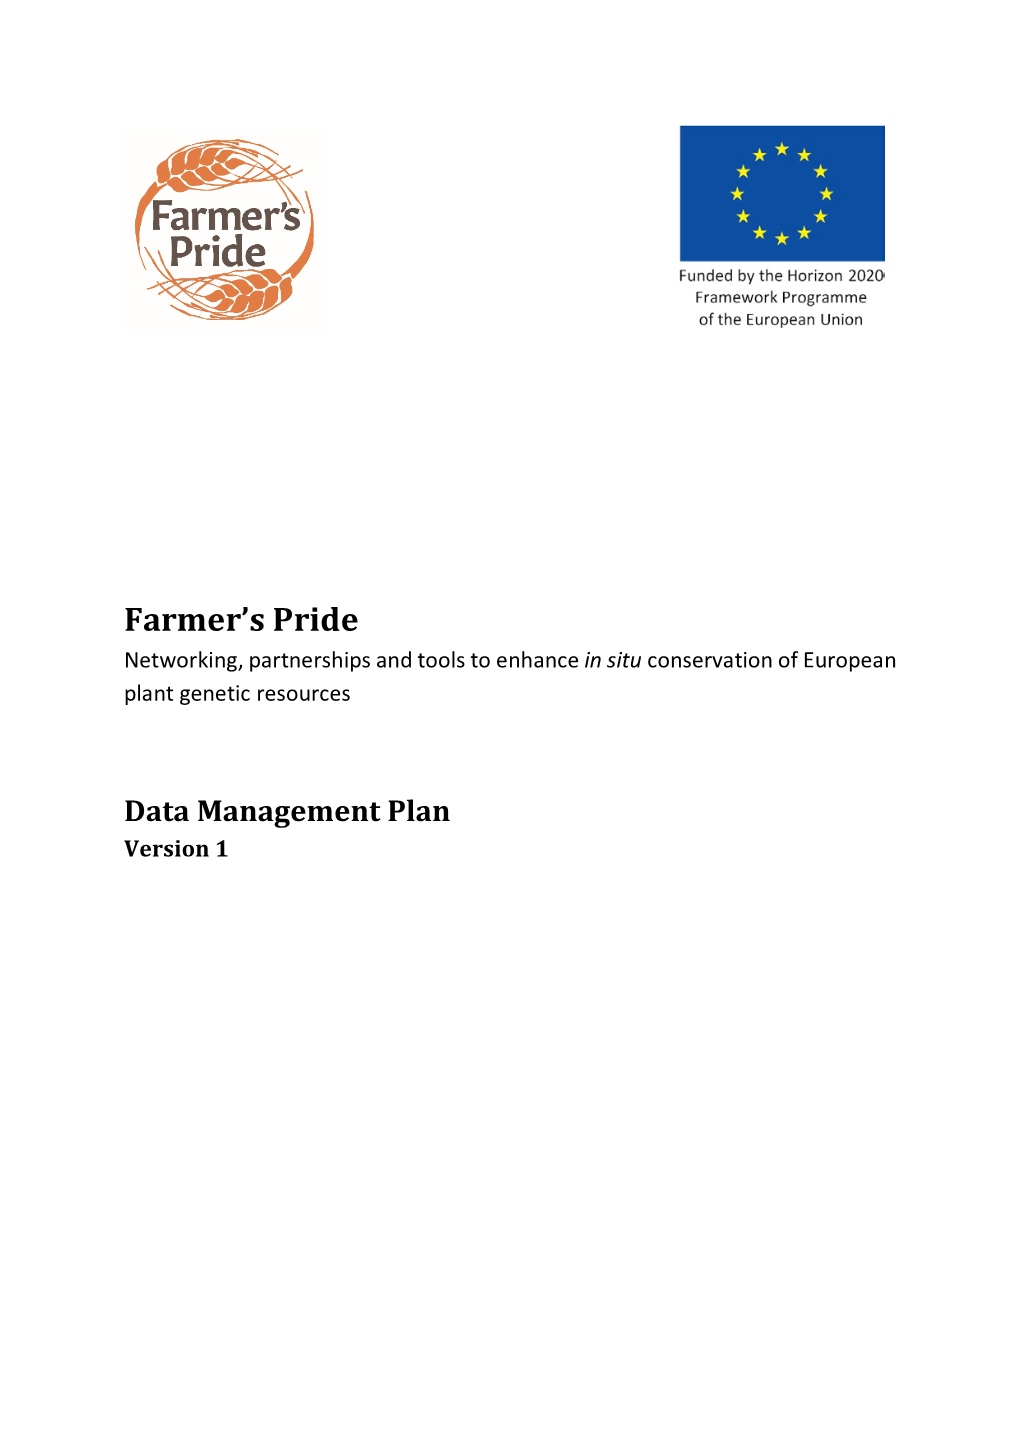 Farmer's Pride Project with Your Consent (See Question 3.2)